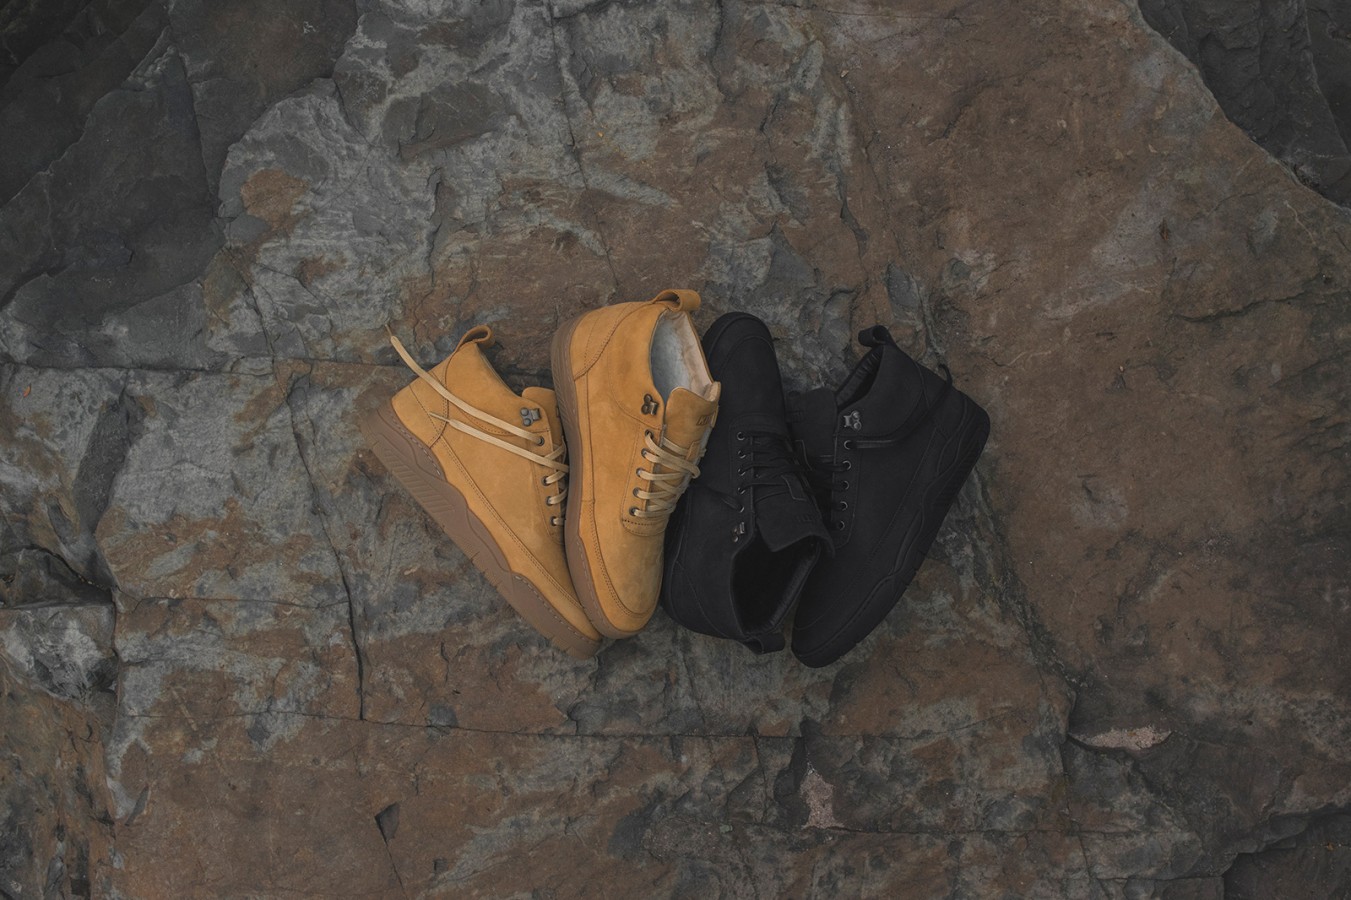 A Full Look: Ronnie Fieg x Filling Pieces Collaboration